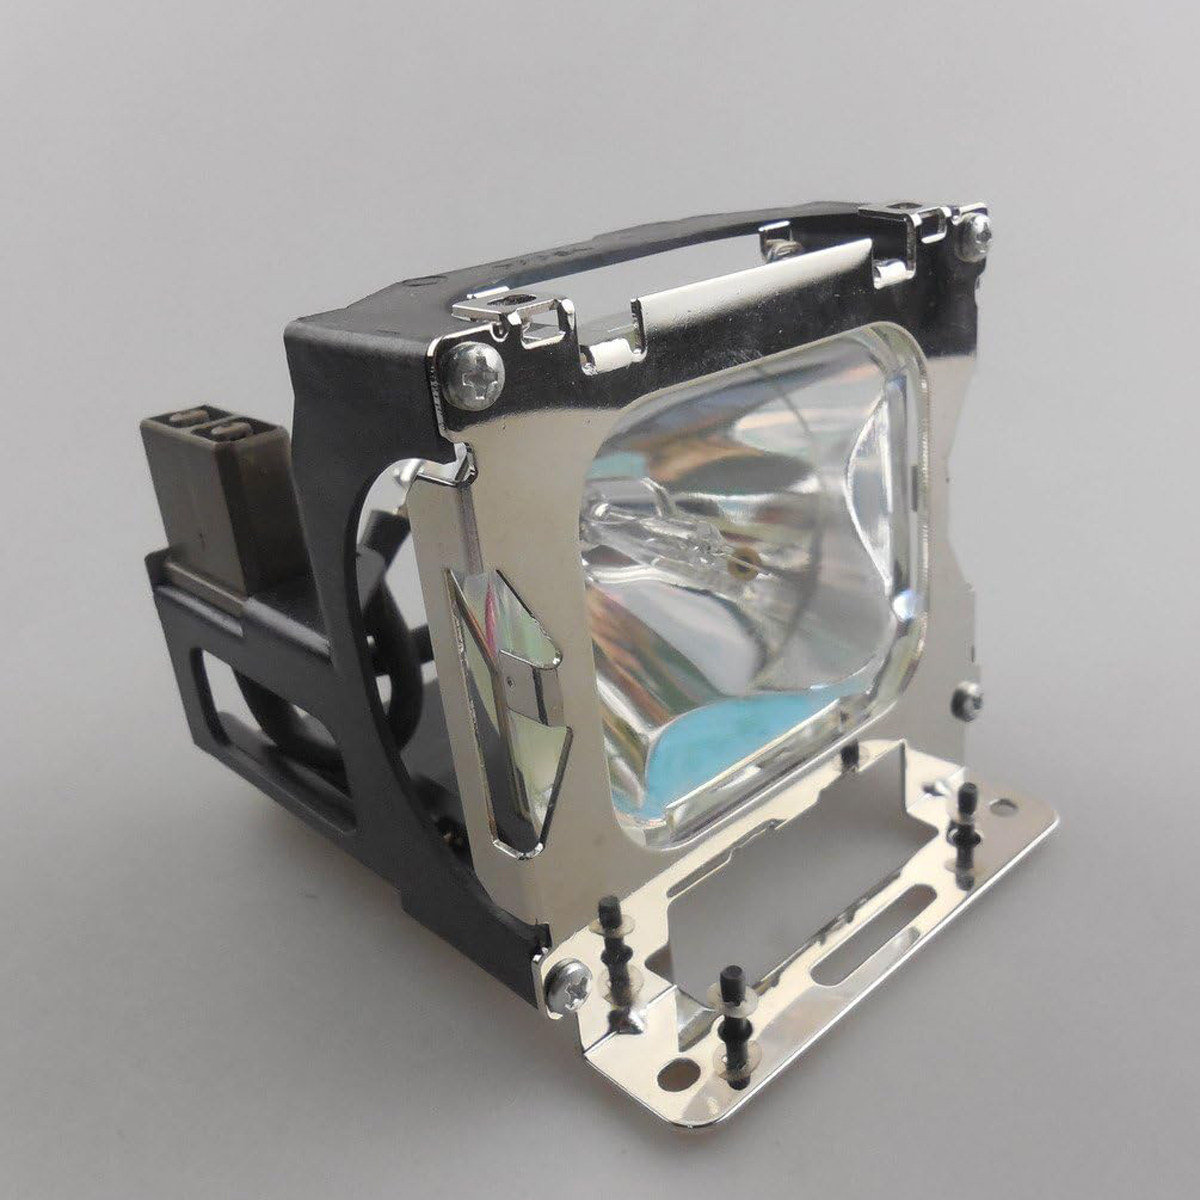 Replacement Projector lamp 78-6969-8583-3 For 3M Projector